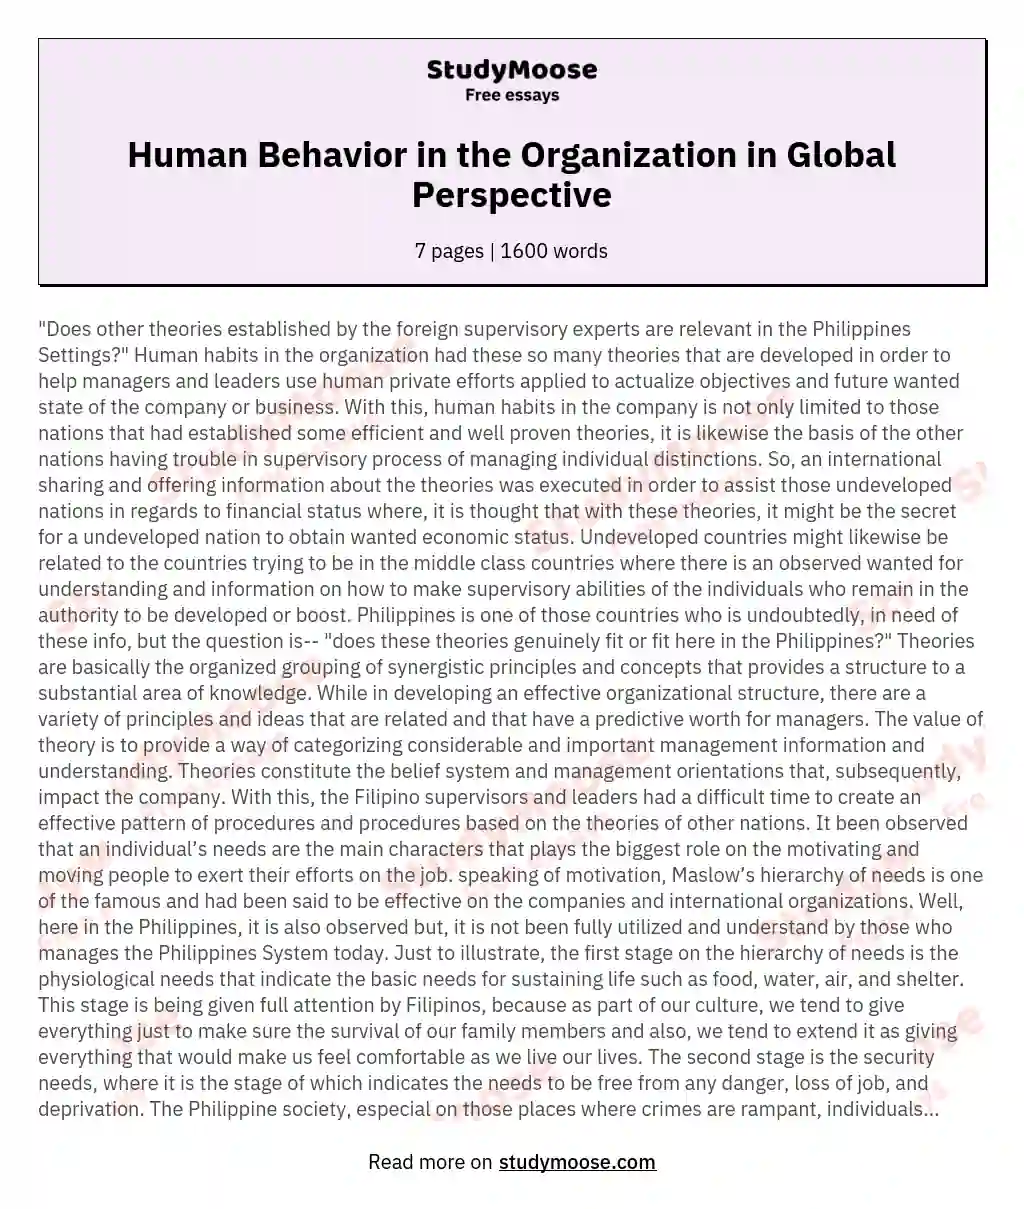 Human Behavior in the Organization in Global Perspective essay